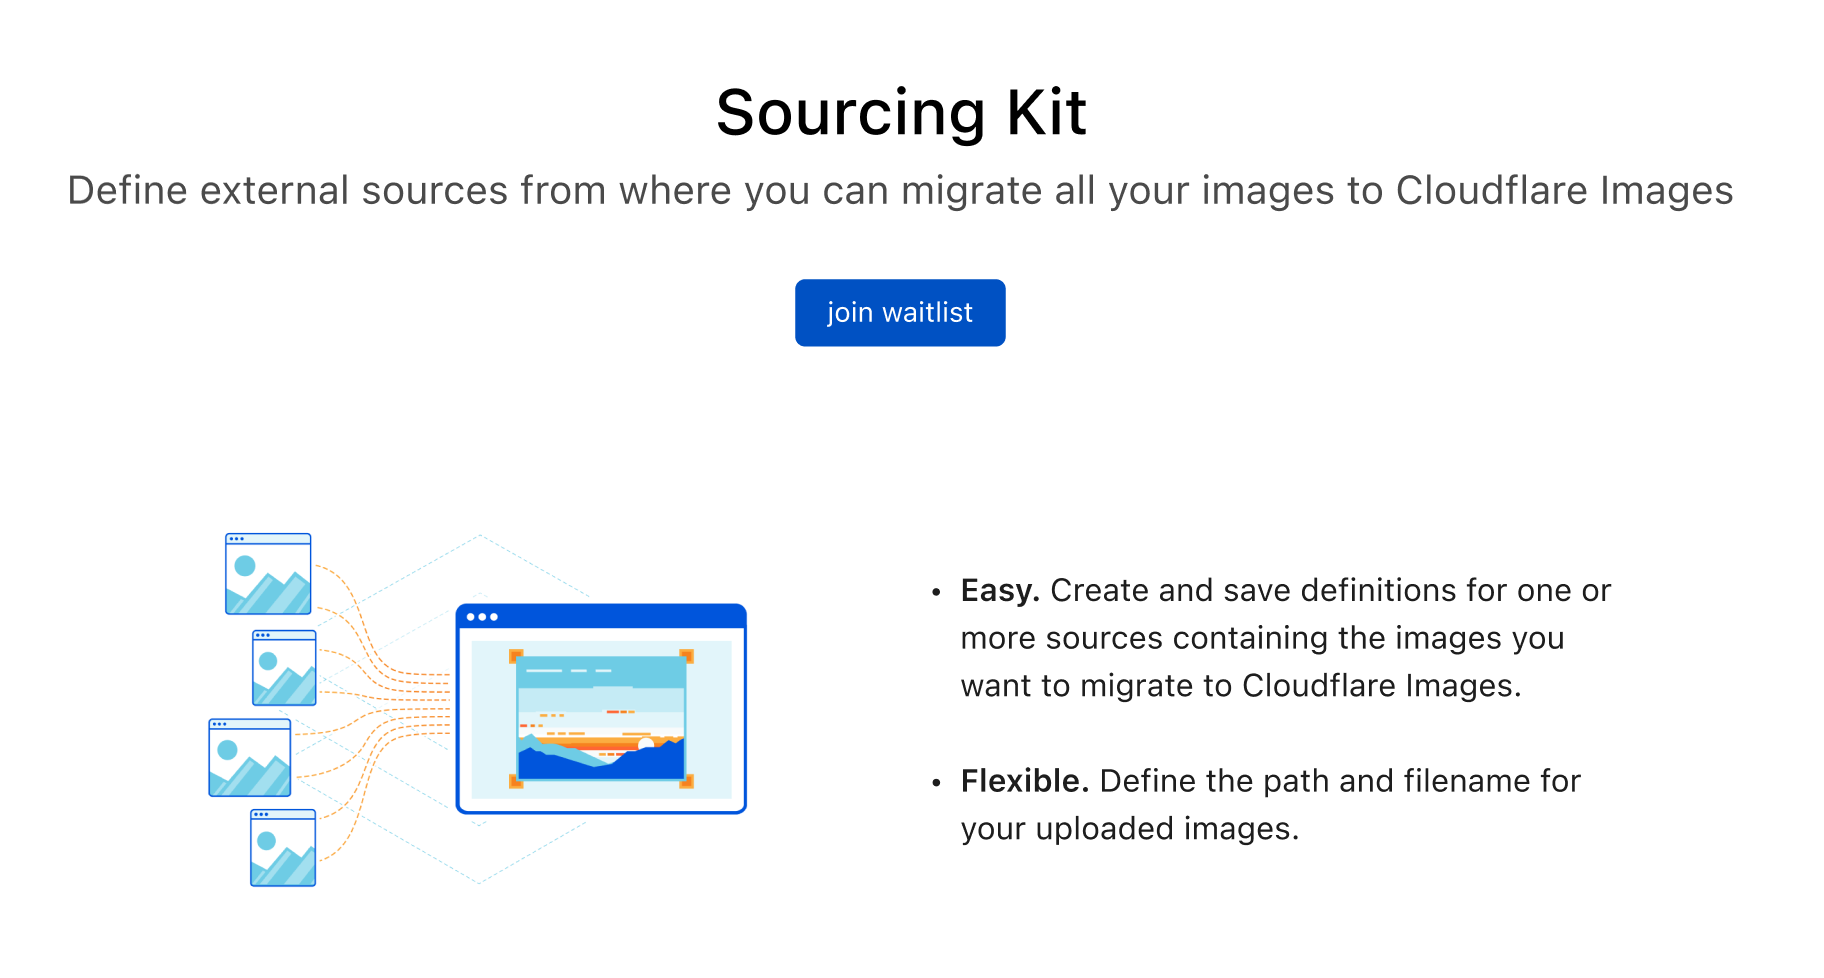 Announcing the Cloudflare Images Sourcing Kit